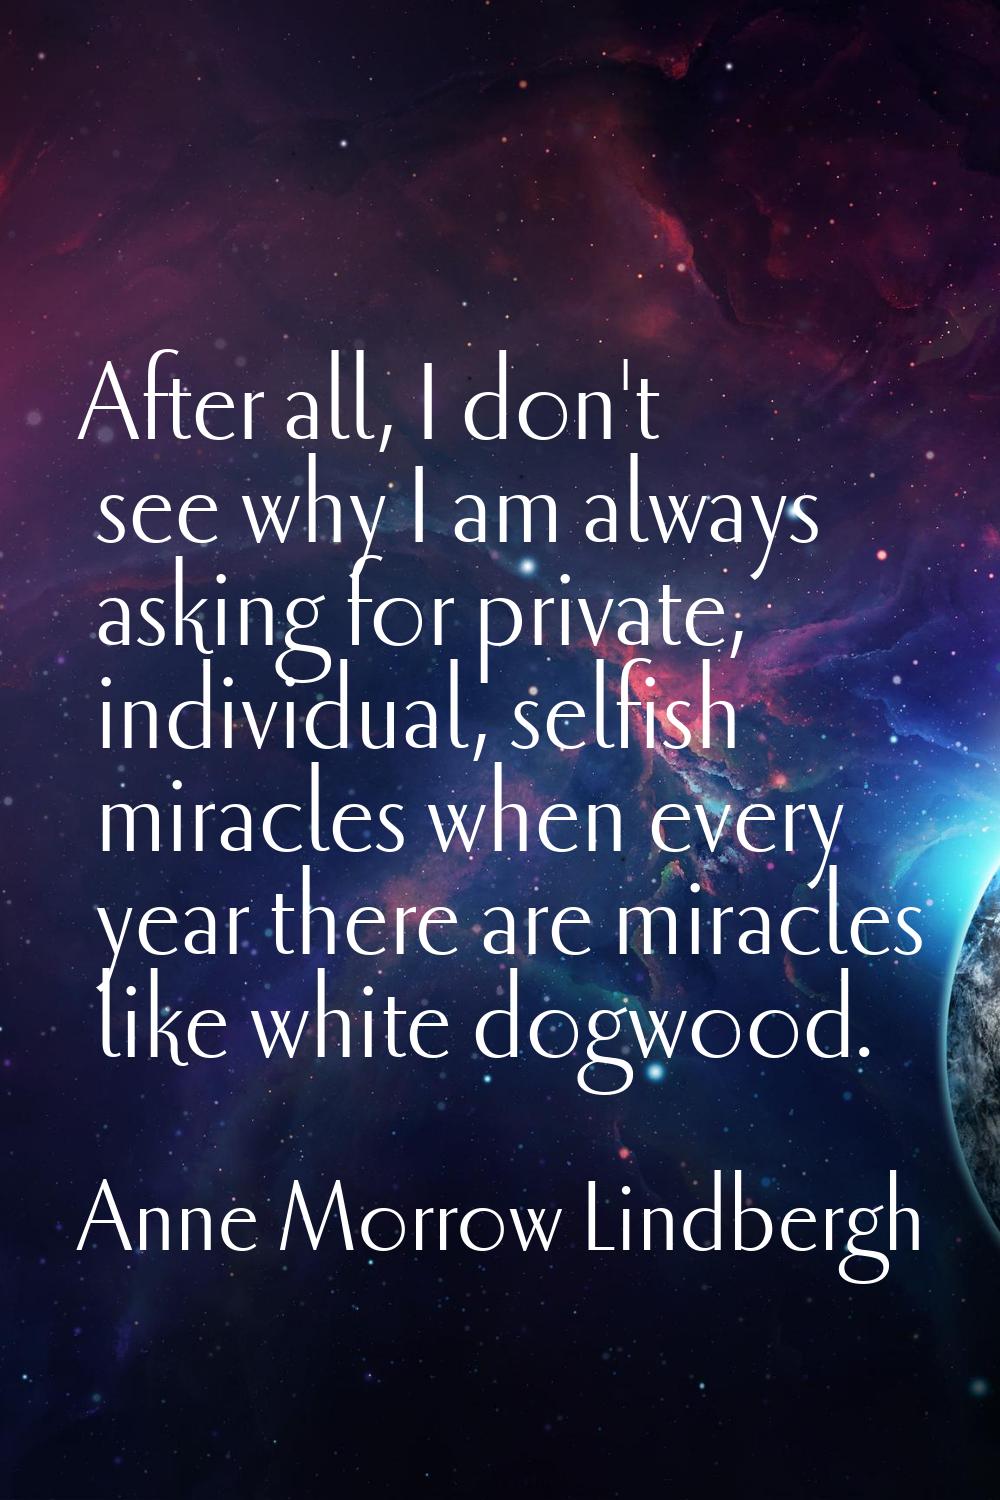 After all, I don't see why I am always asking for private, individual, selfish miracles when every 